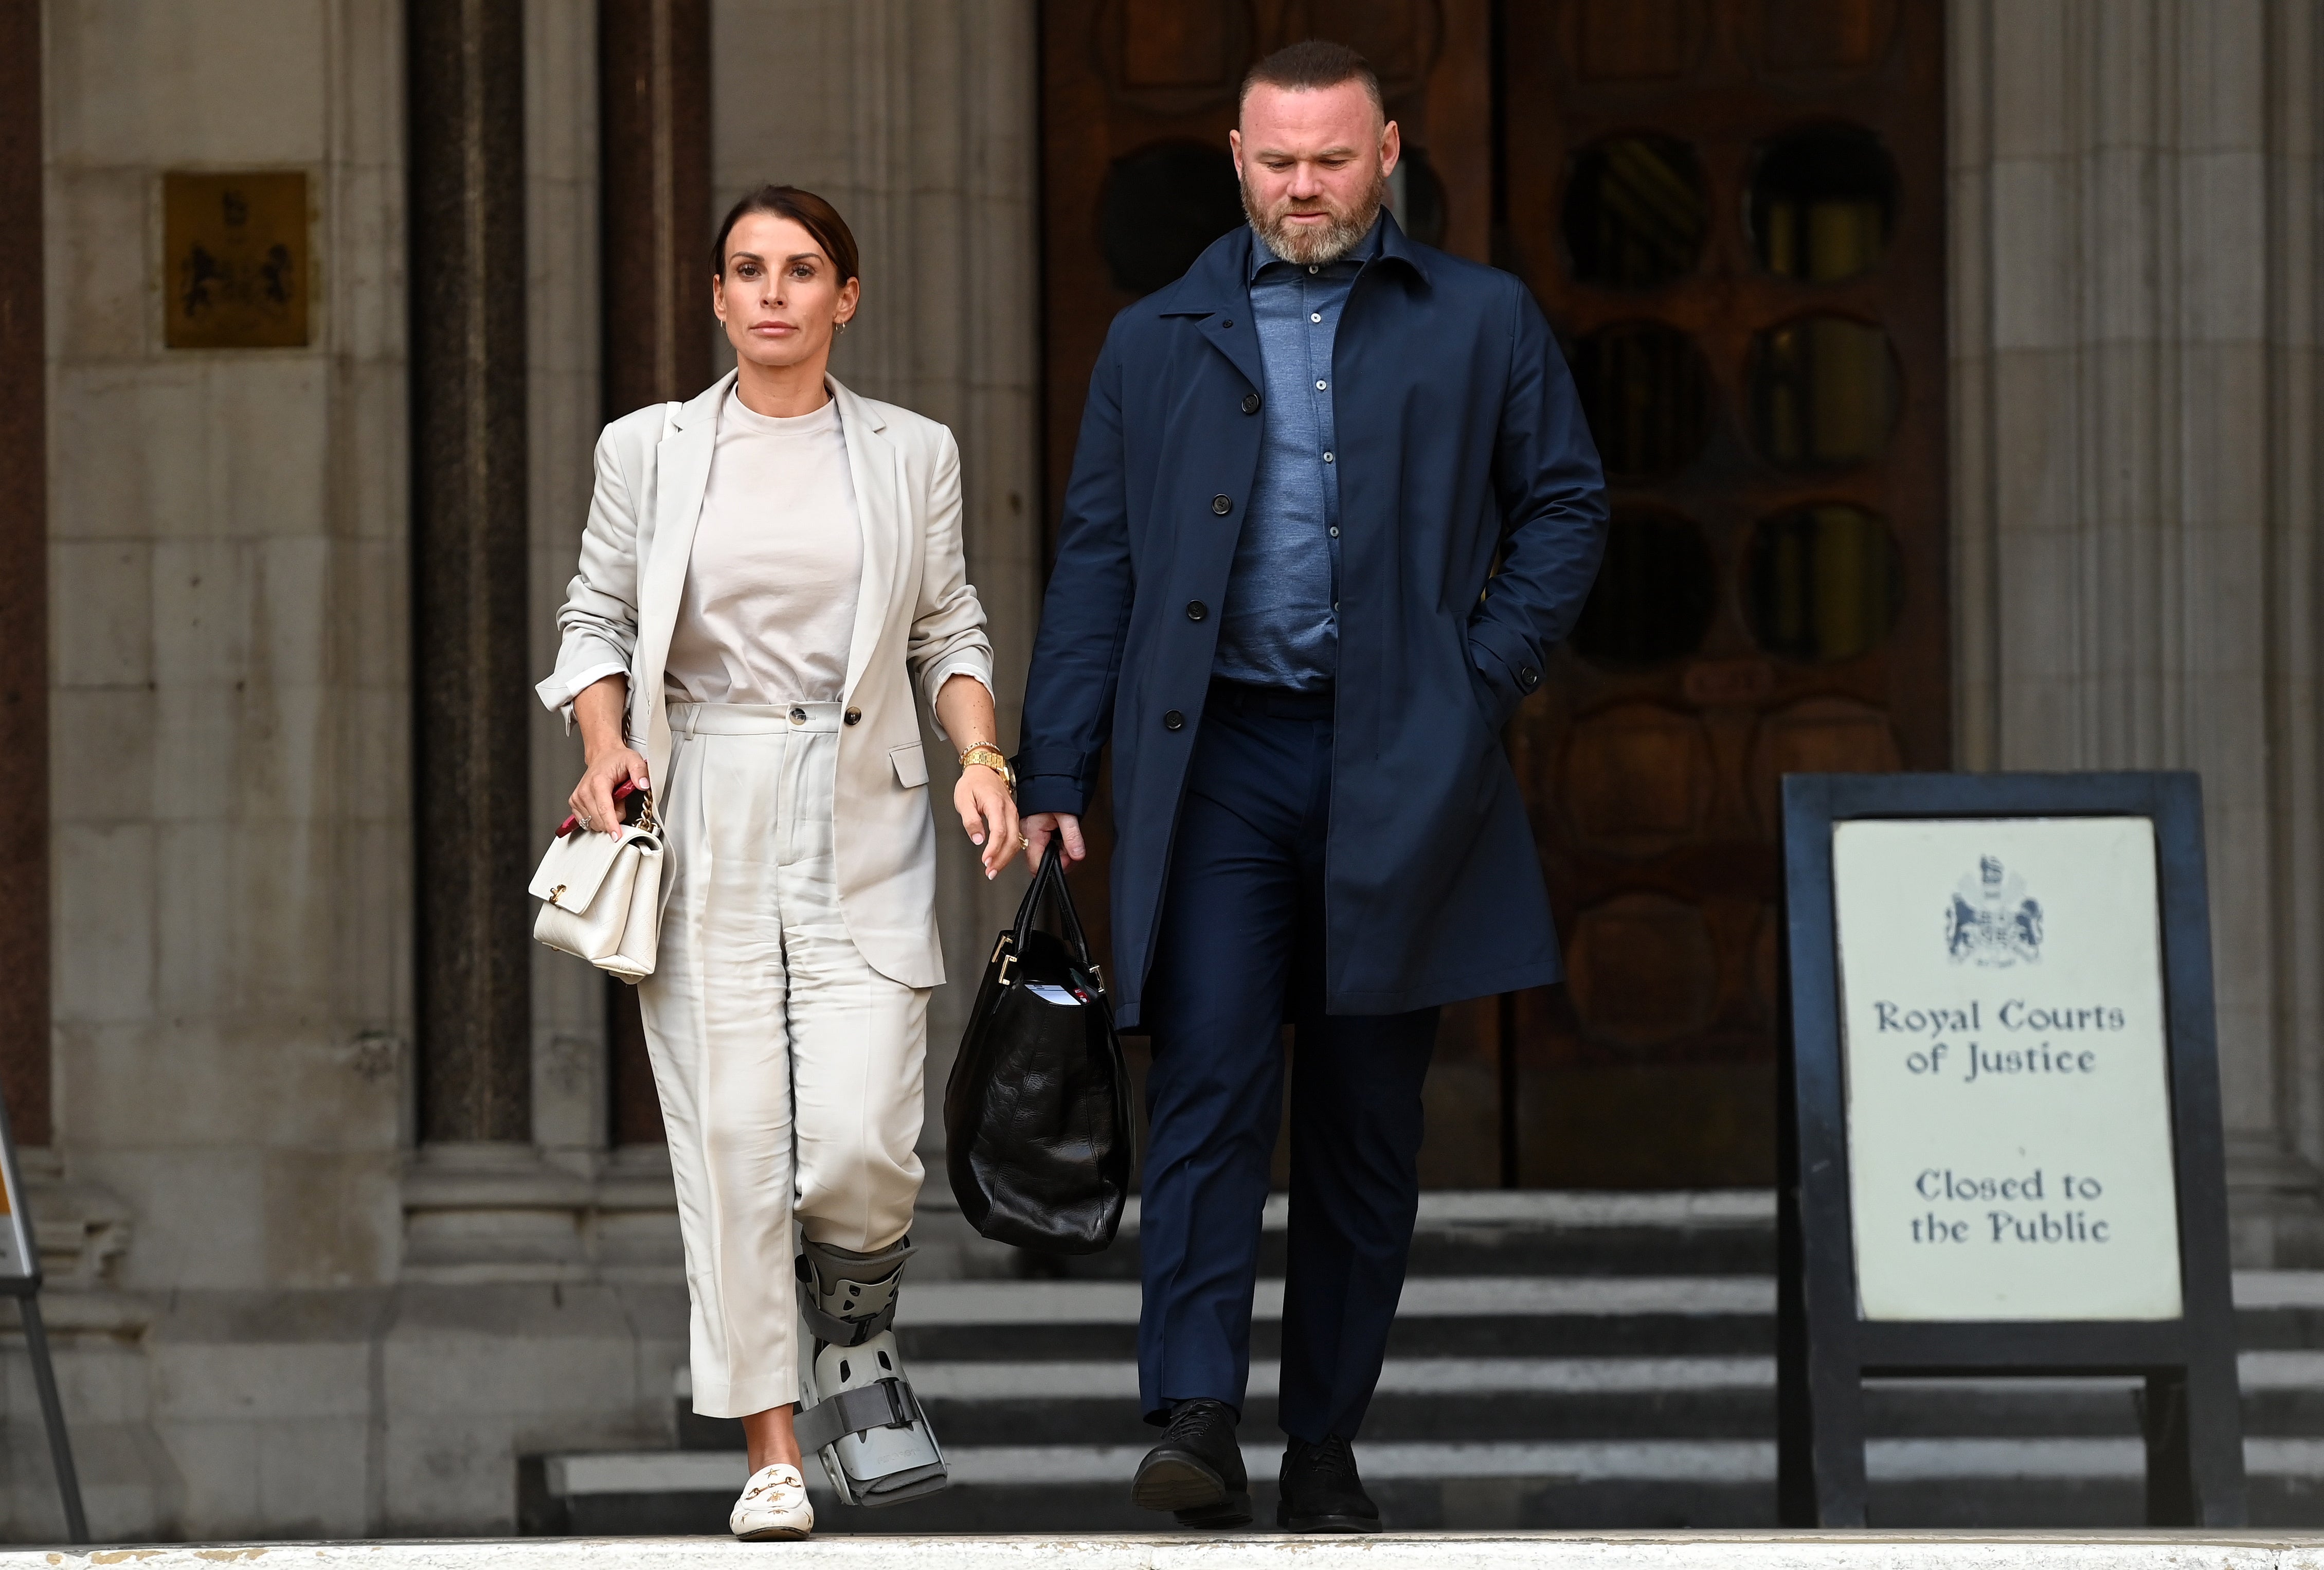 Wayne Rooney has been by his wife’s side throughout the trial